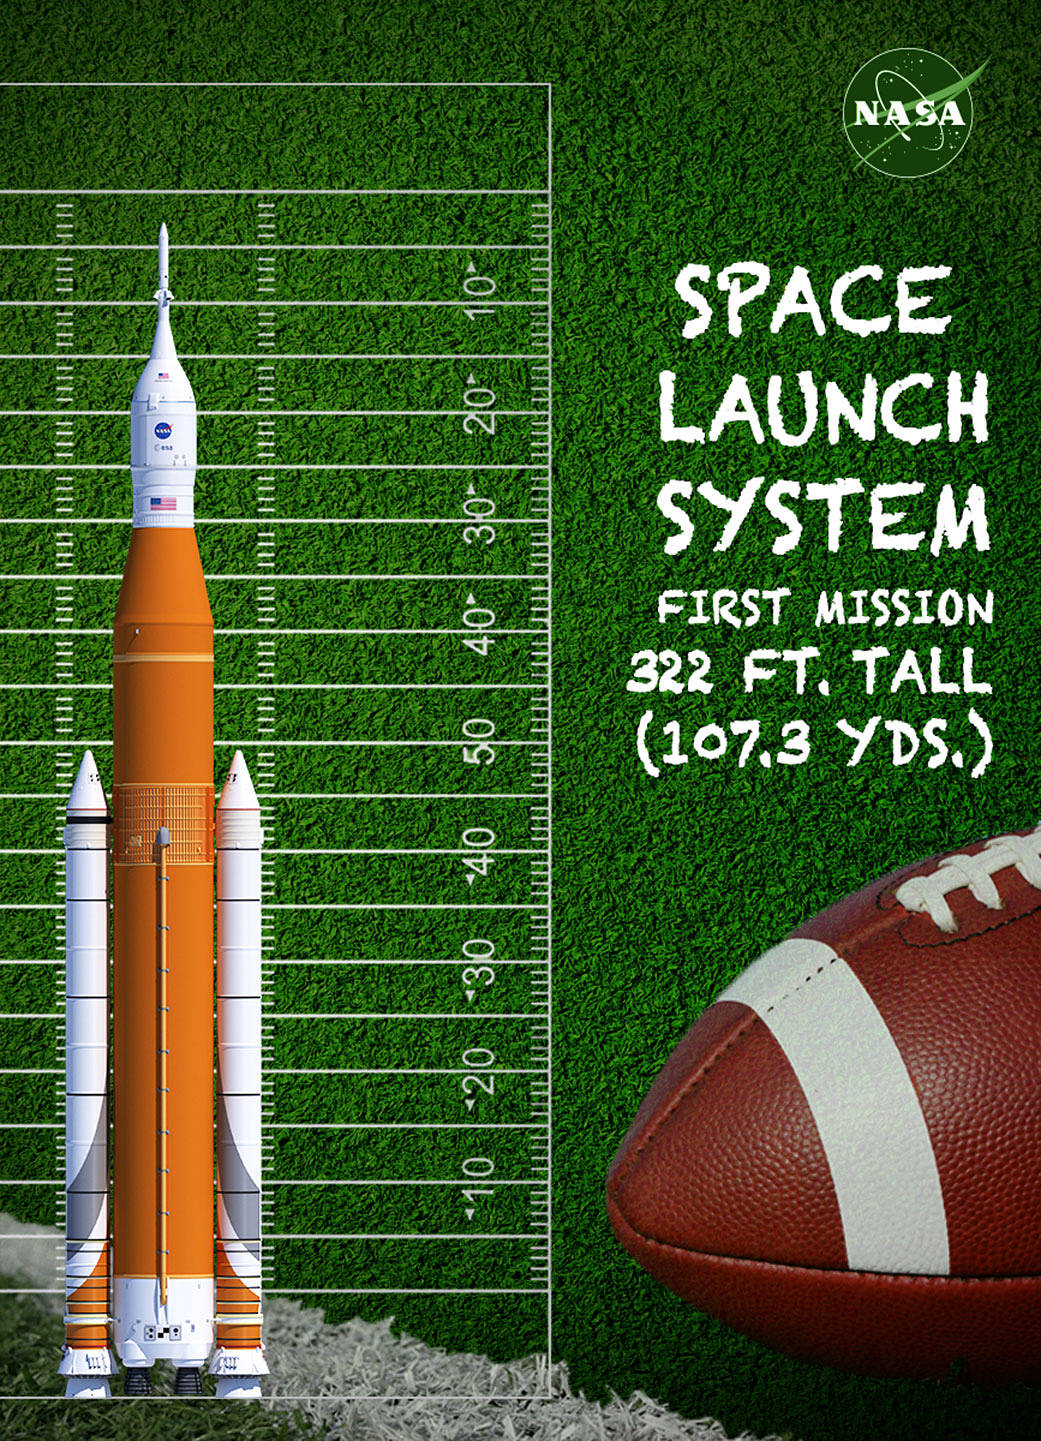 Space Launch System - First Mission